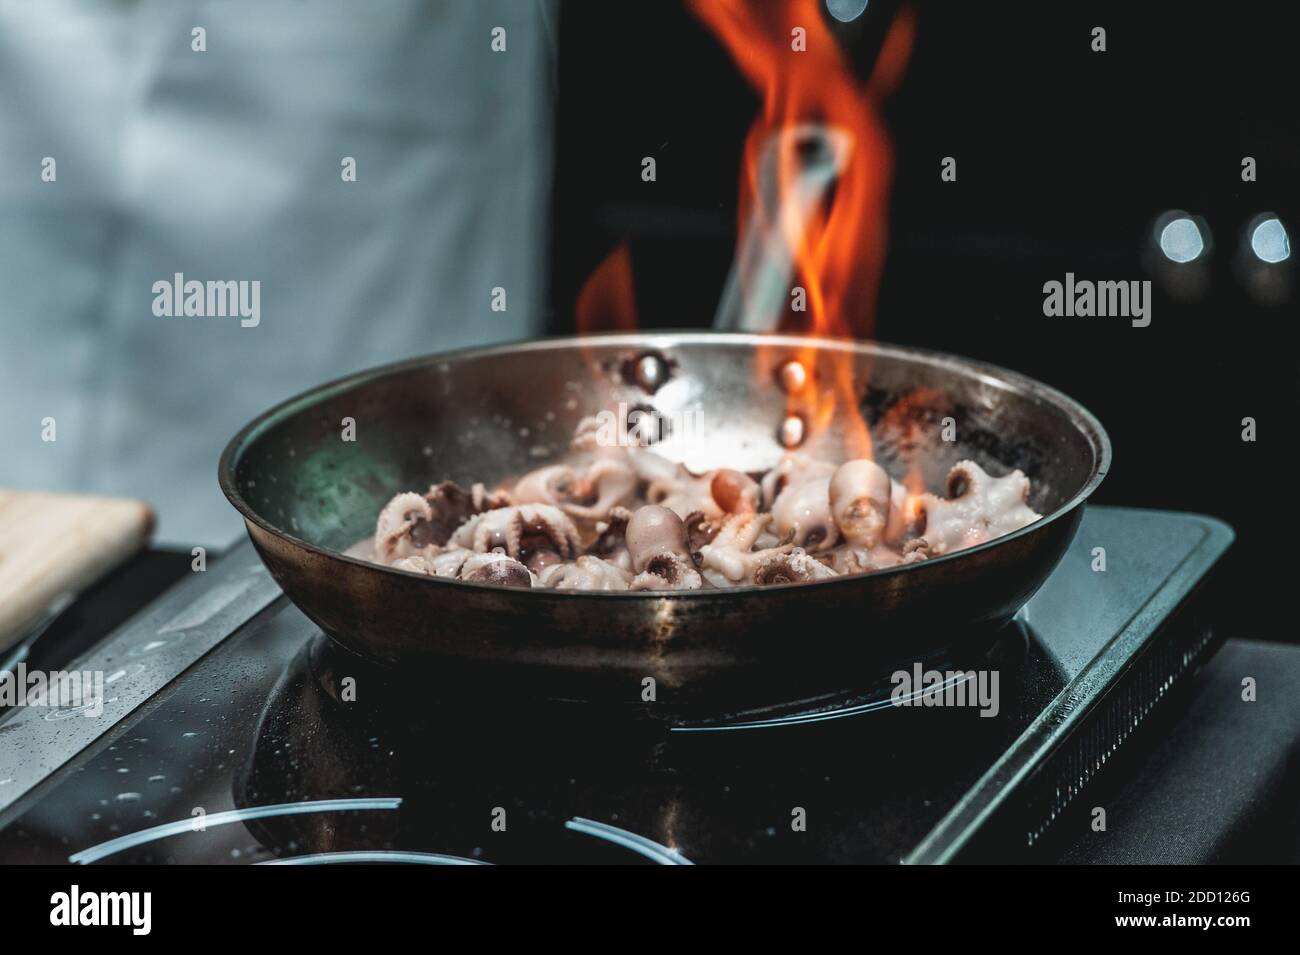 The chef cooks small octopus on a metal frying pan at the